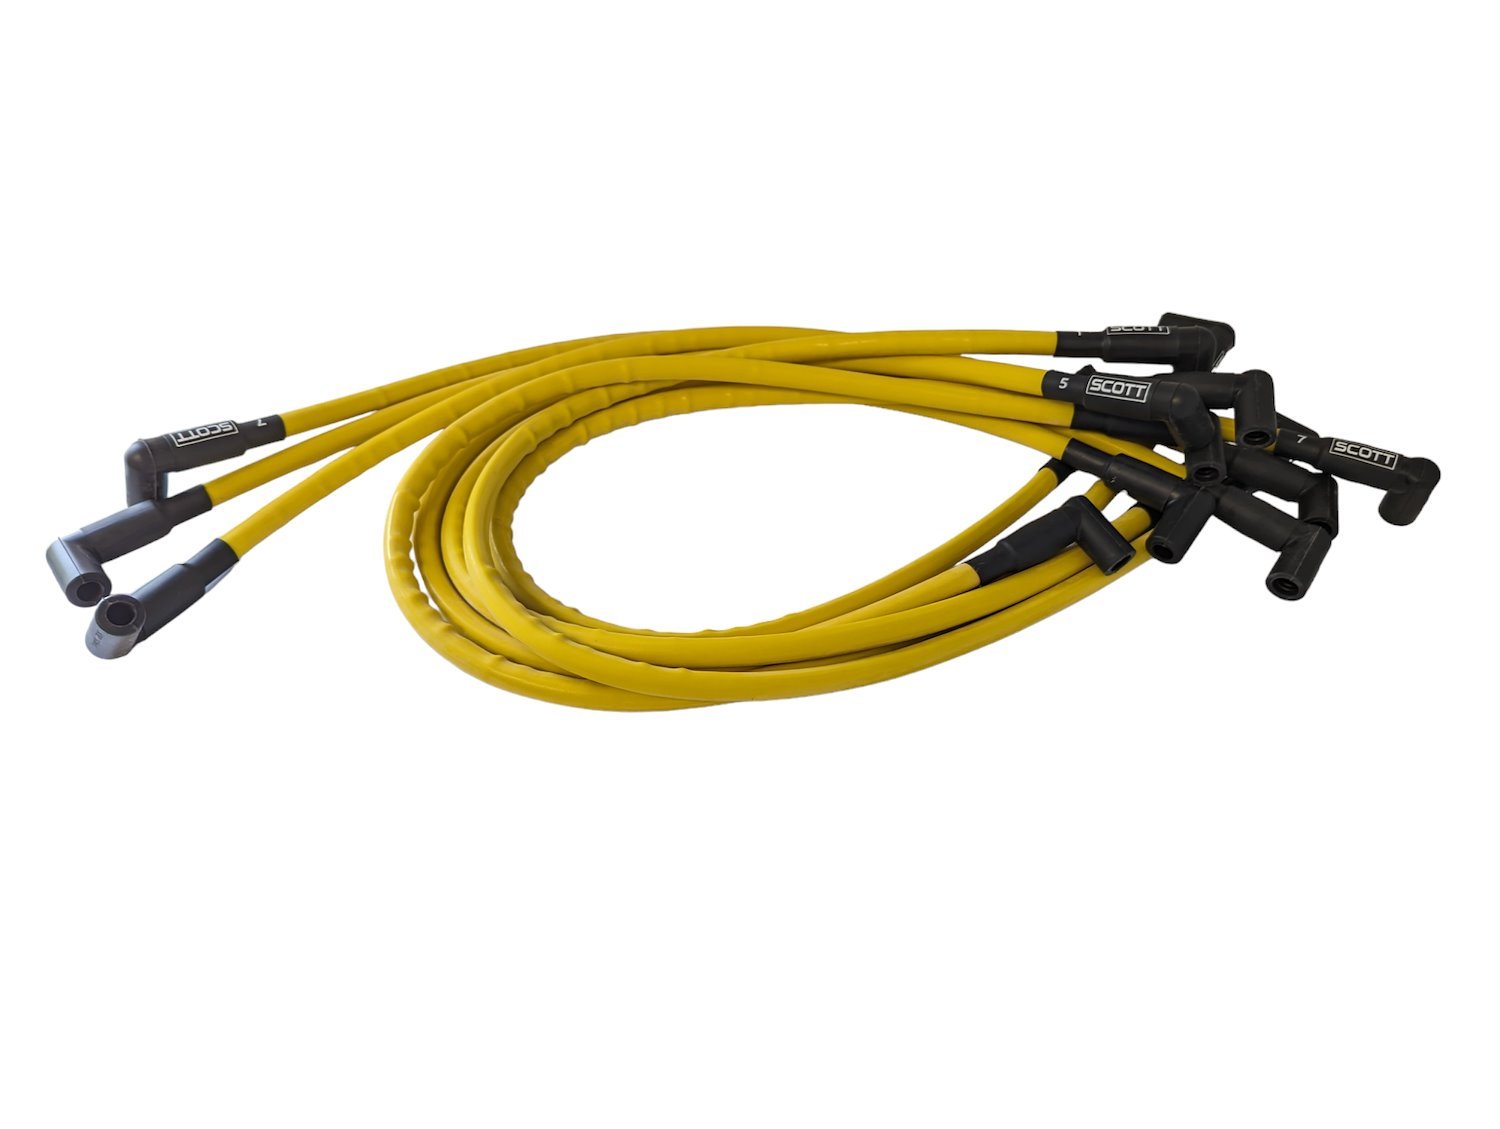 SPW-CH-530-7 High-Performance Silicone-Sleeved Spark Plug Wire Set for Big Block Ford, Under Header [Yellow]